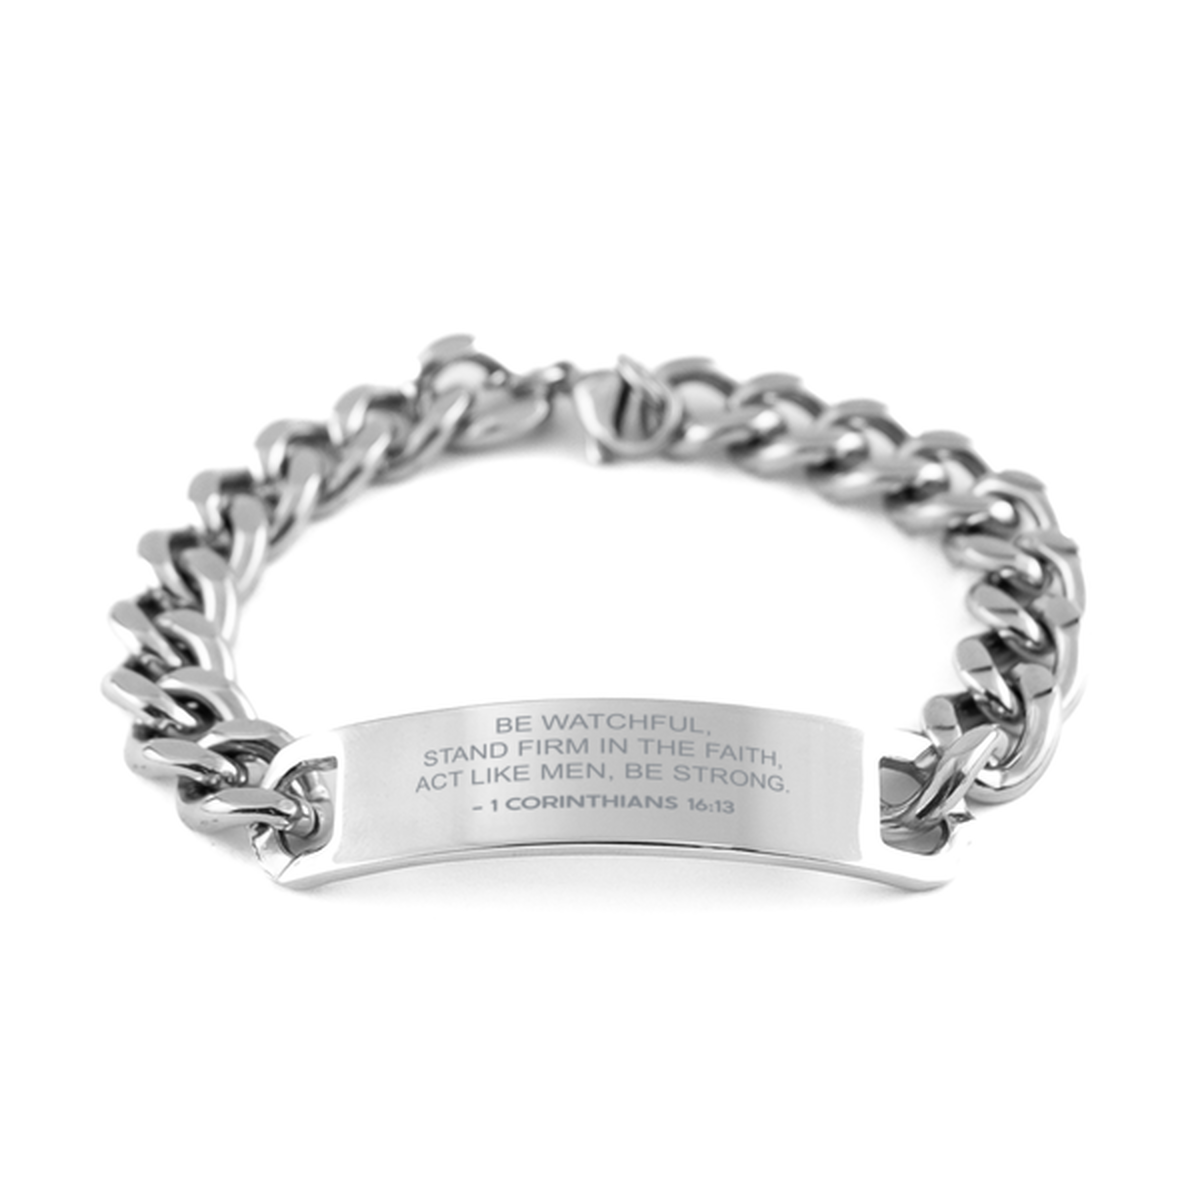 Bible Verse Chain Stainless Steel Bracelet, 1 Corinthians 16:13 Be Watchful, Stand Firm In The Faith, Act Like, Inspirational Christian Gifts For Men Women